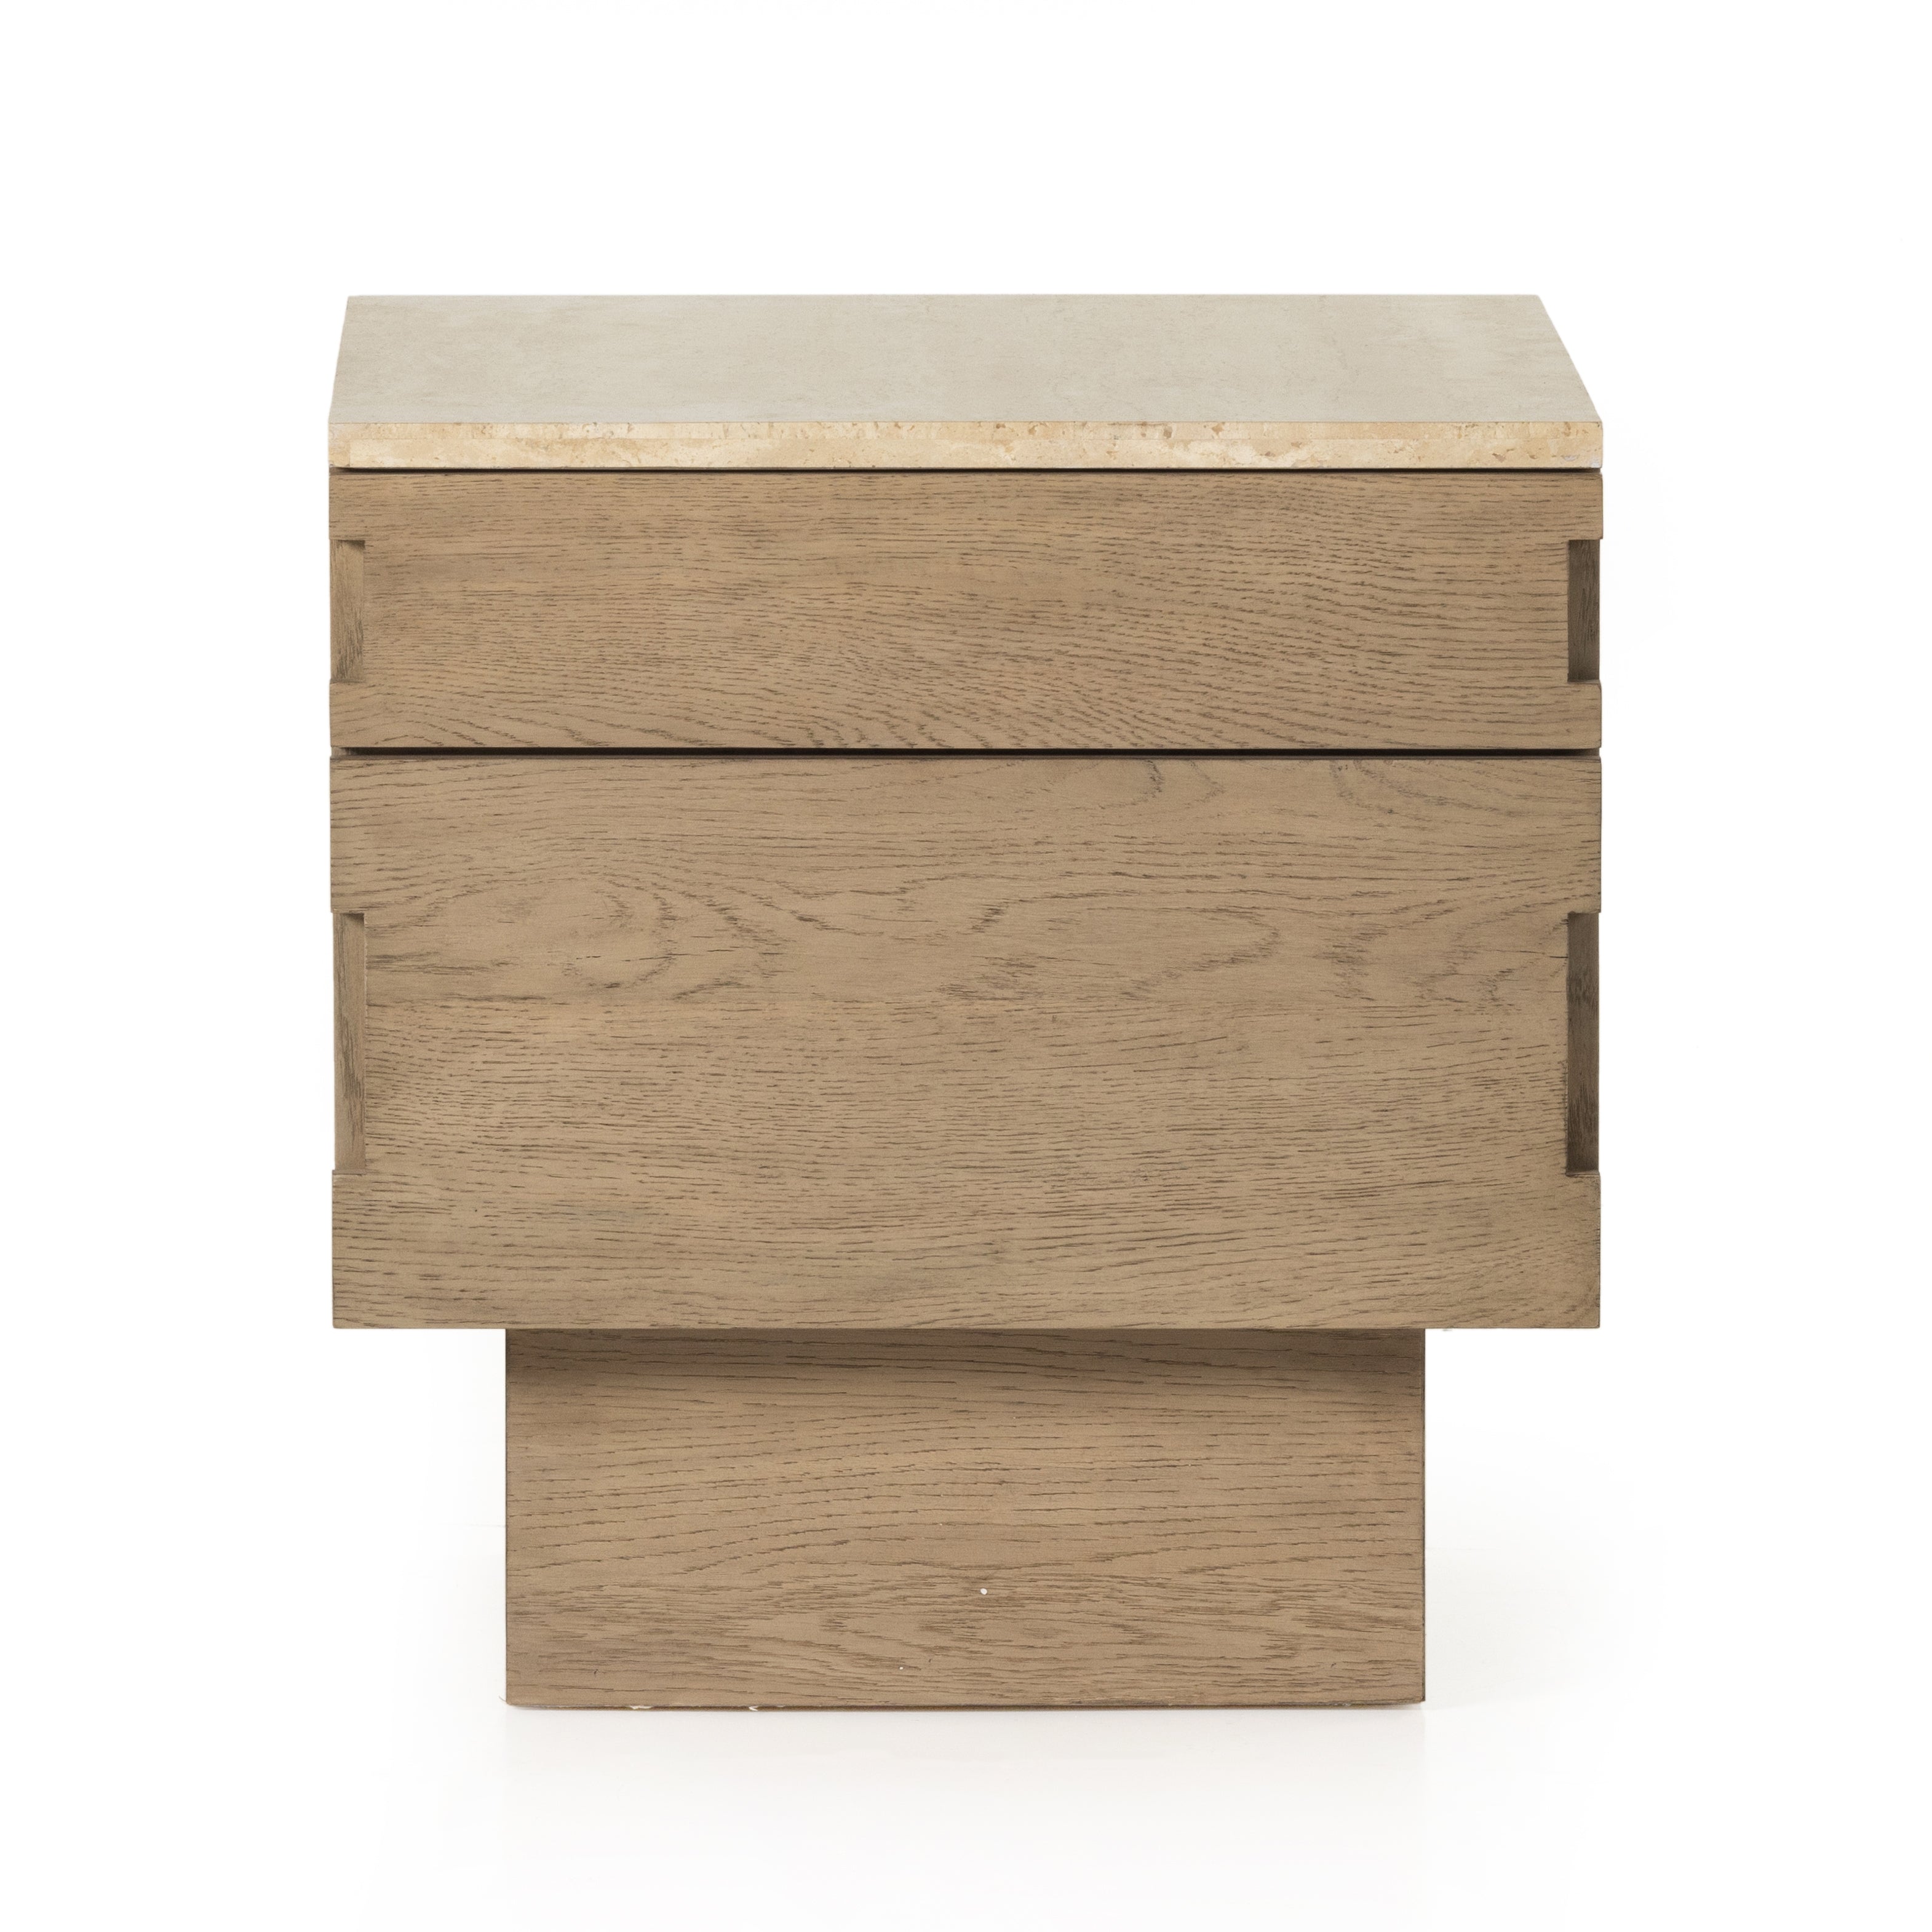 Made from light-finished oak atop a plinth-style base, dual drawers bring extra storage space to the bedside, with a solid travertine top reflective of 1970s inspiration. Amethyst Home provides interior design, new home construction design consulting, vintage area rugs, and lighting in the Seattle metro area.